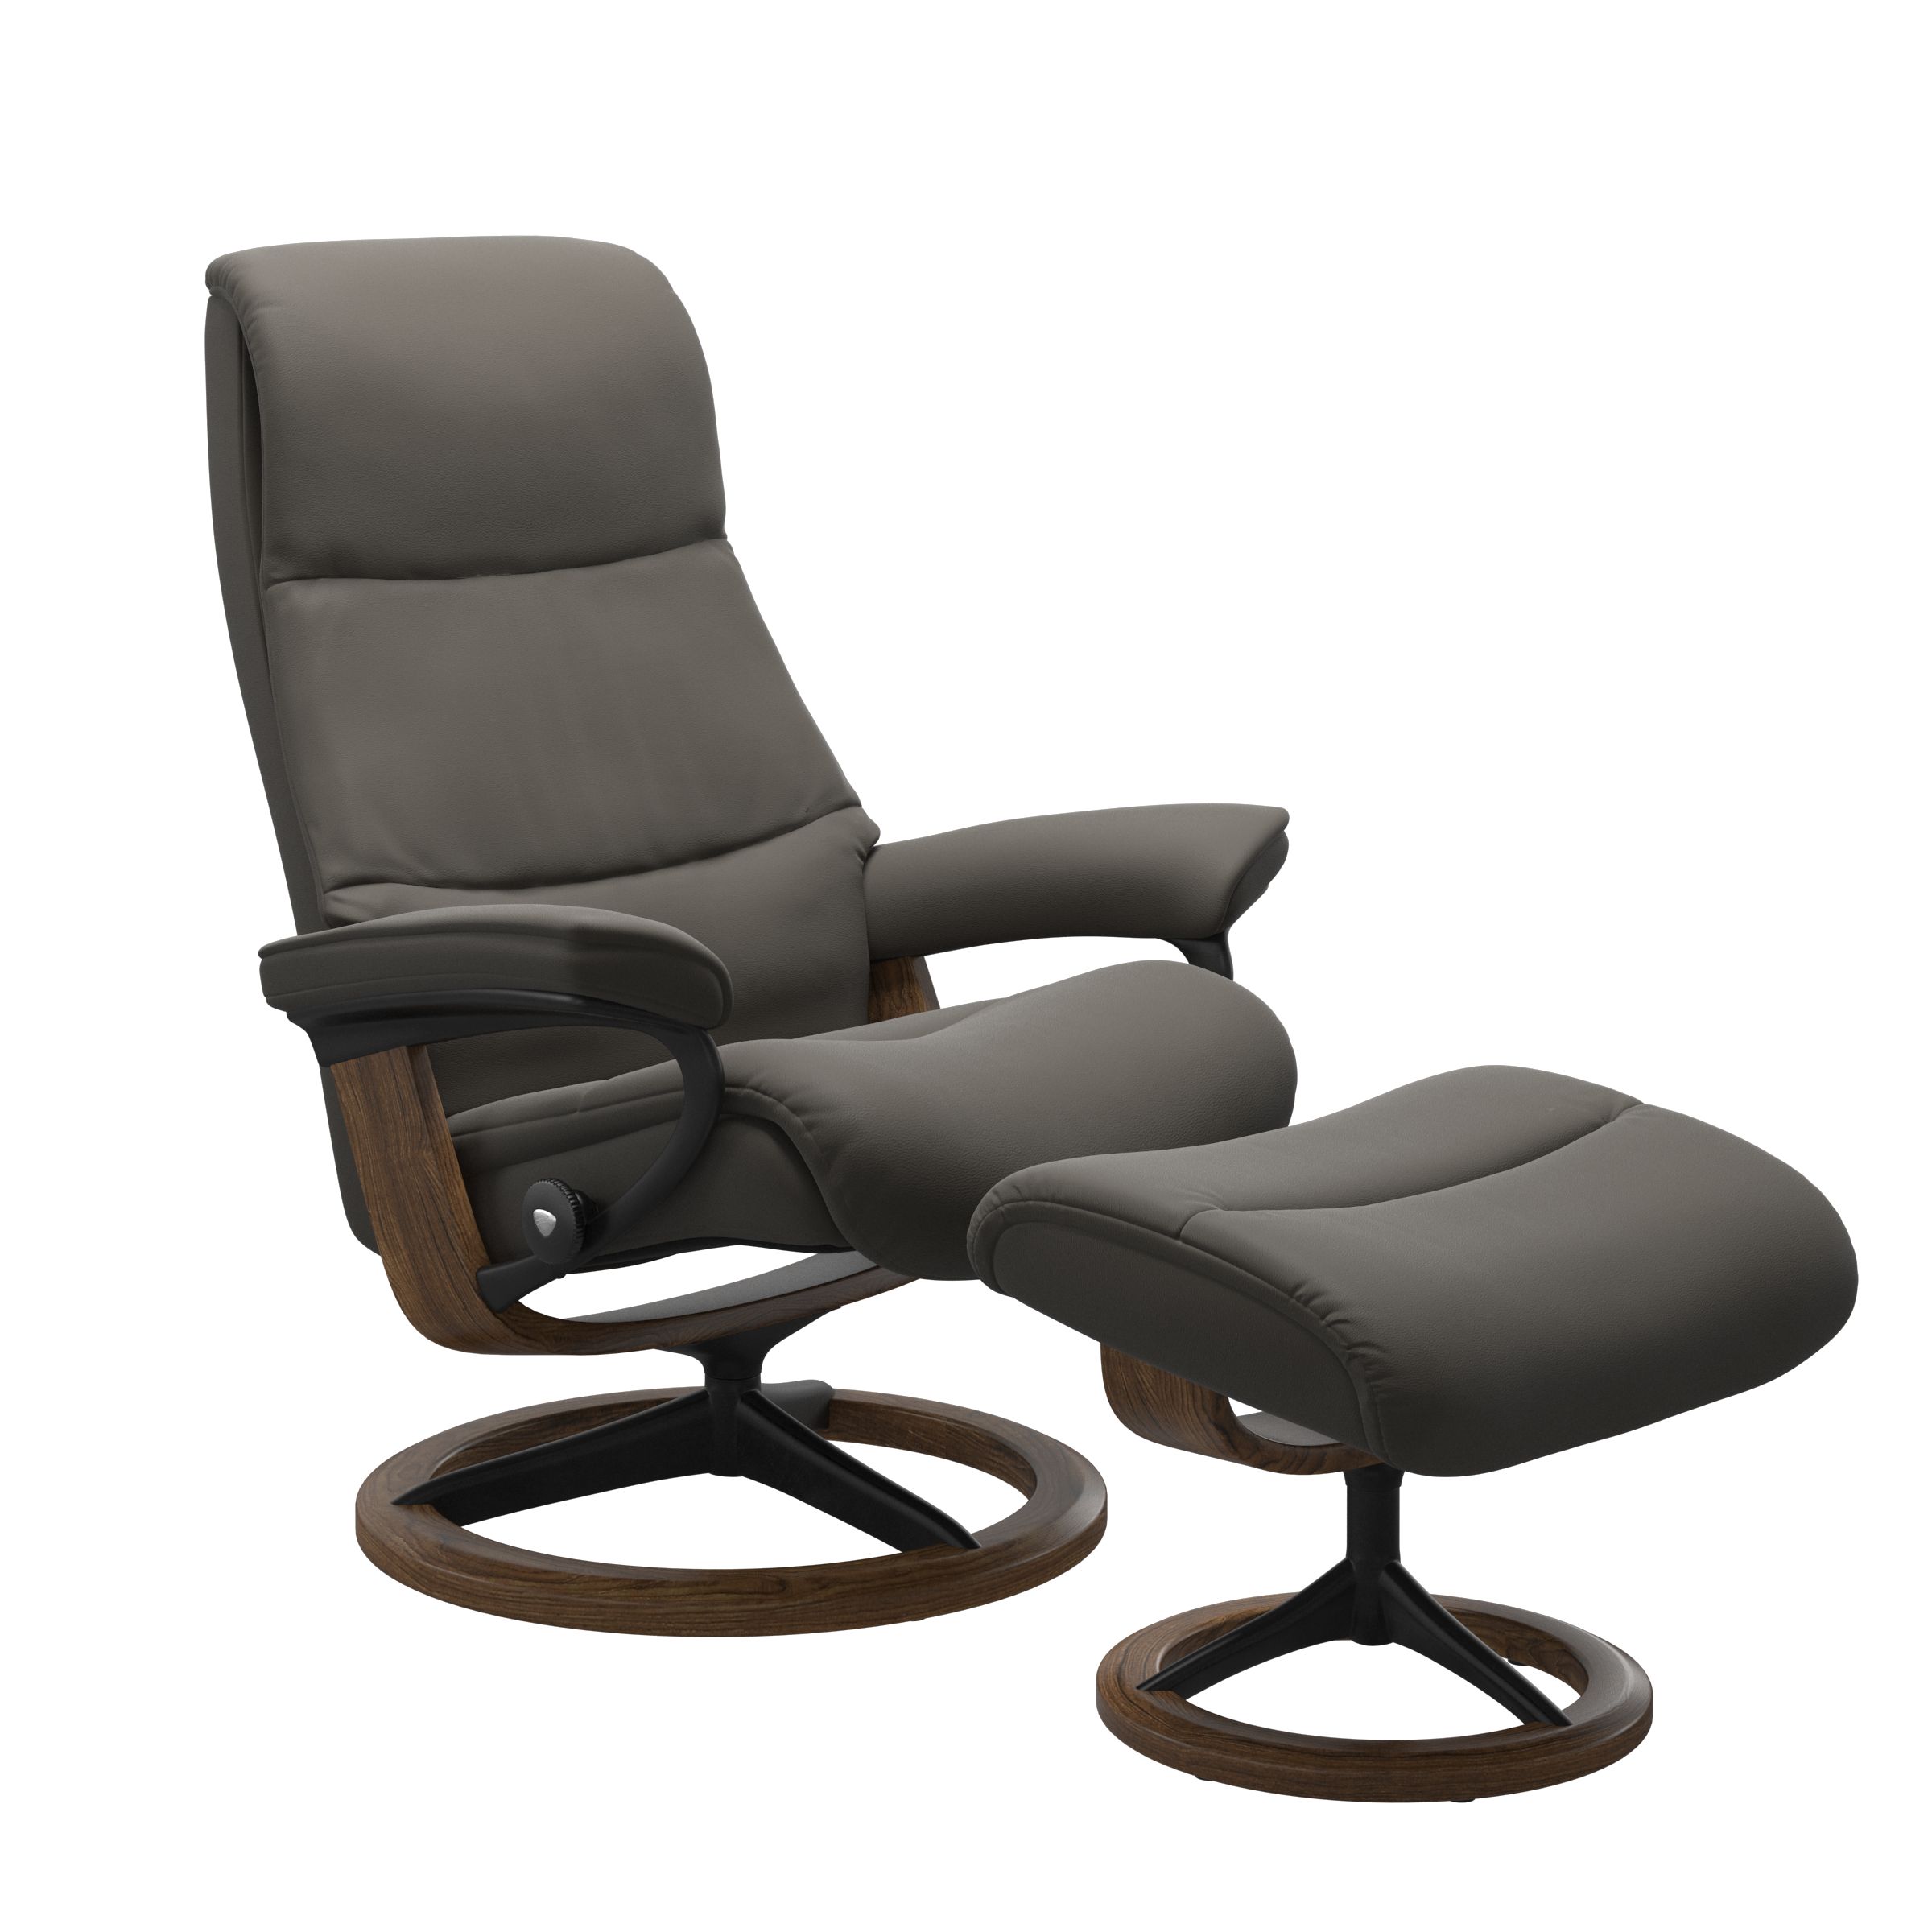 Stressless View Large Recliner and Ottoman with Signature Base